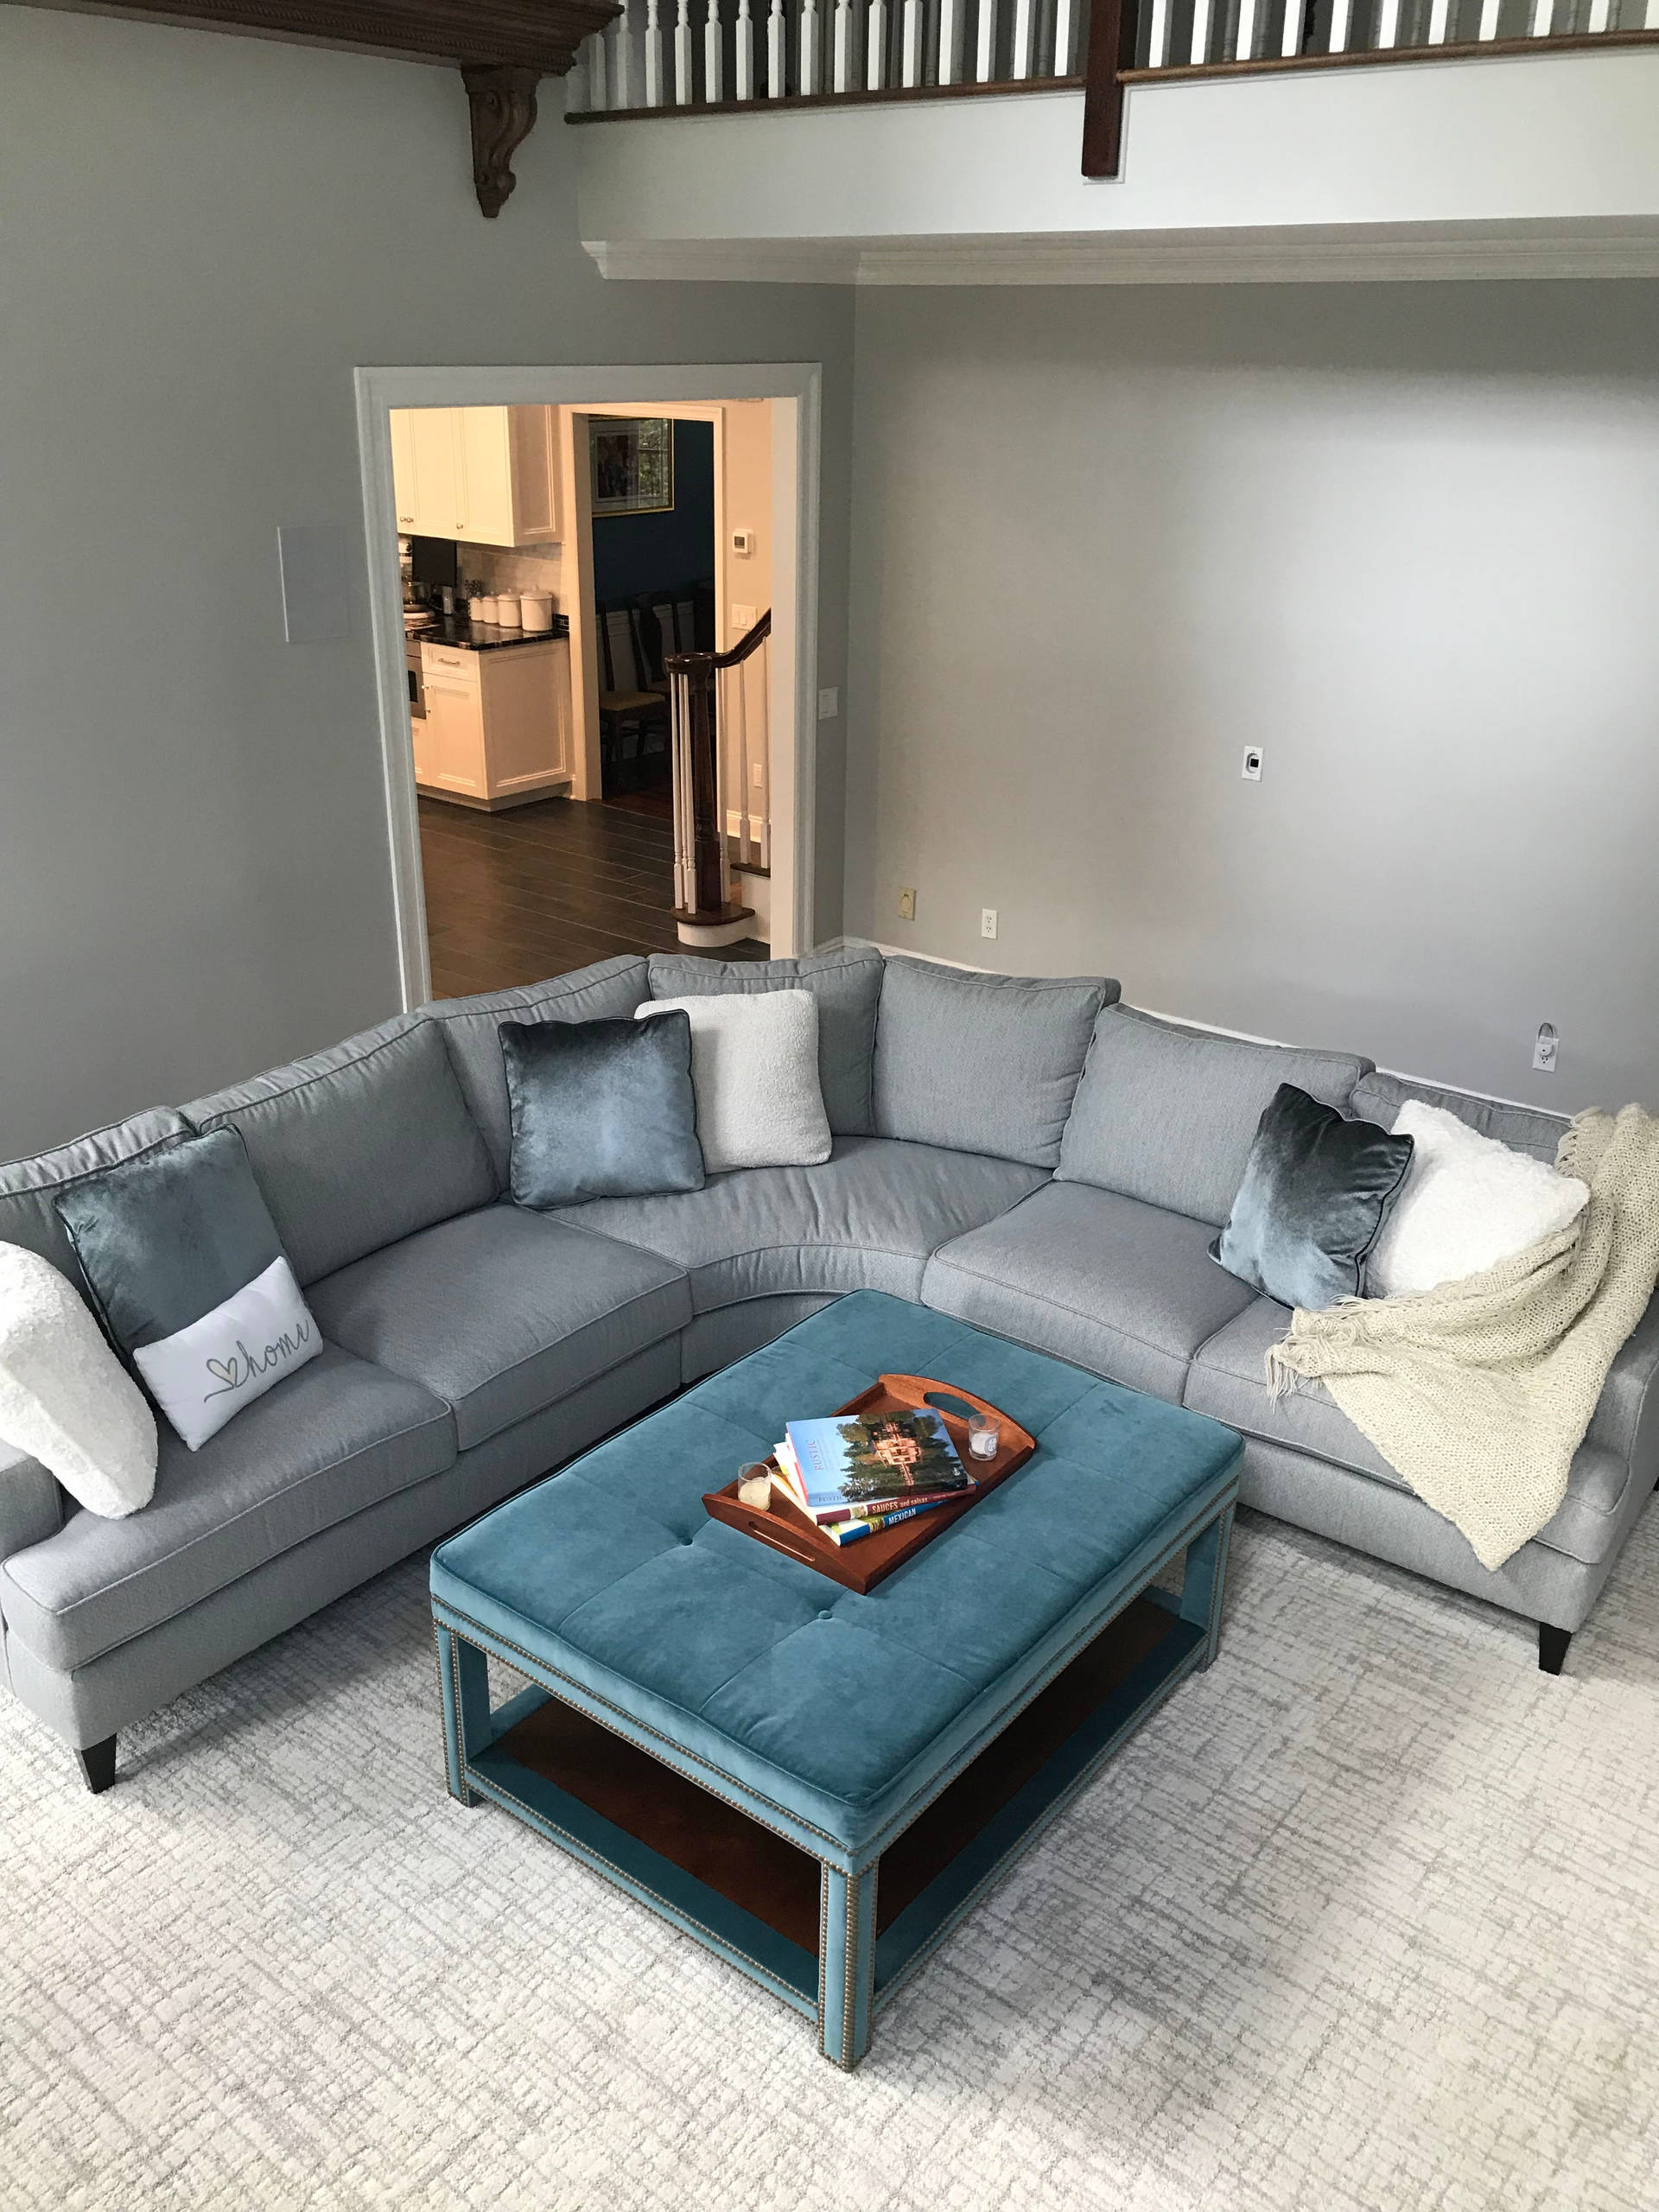 Grand Family Room Staging